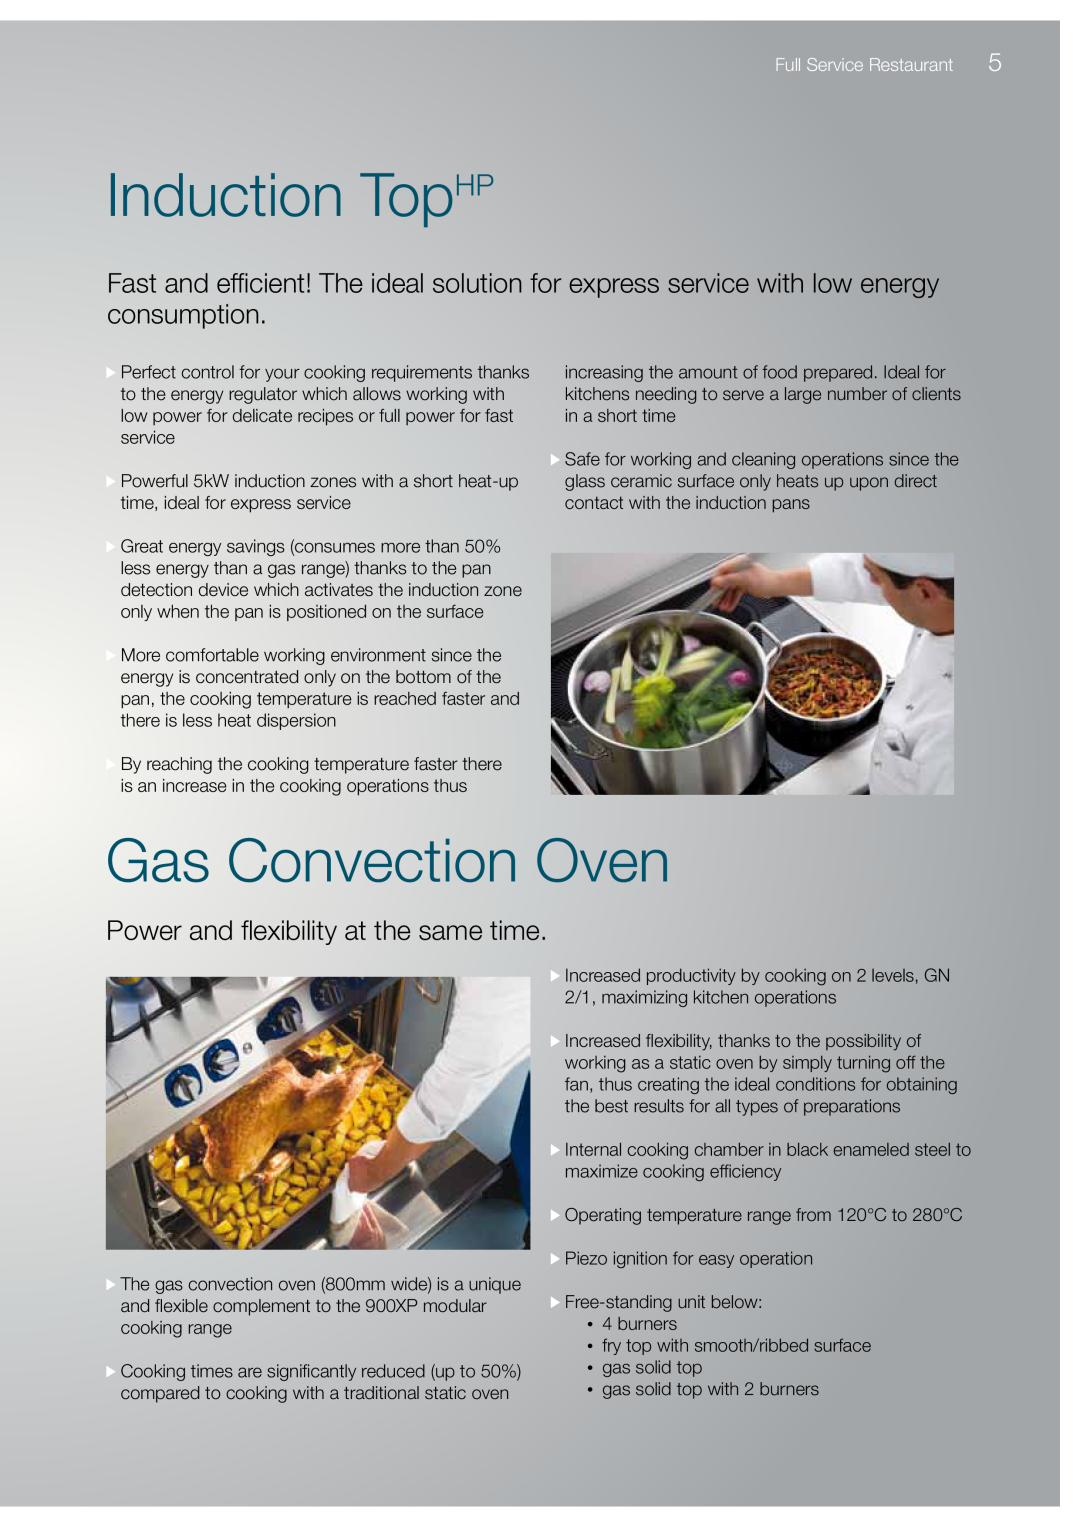 Electrolux 700XP Induction TopHP, Gas Convection Oven, Power and flexibility at the same time, Full Service Restaurant 